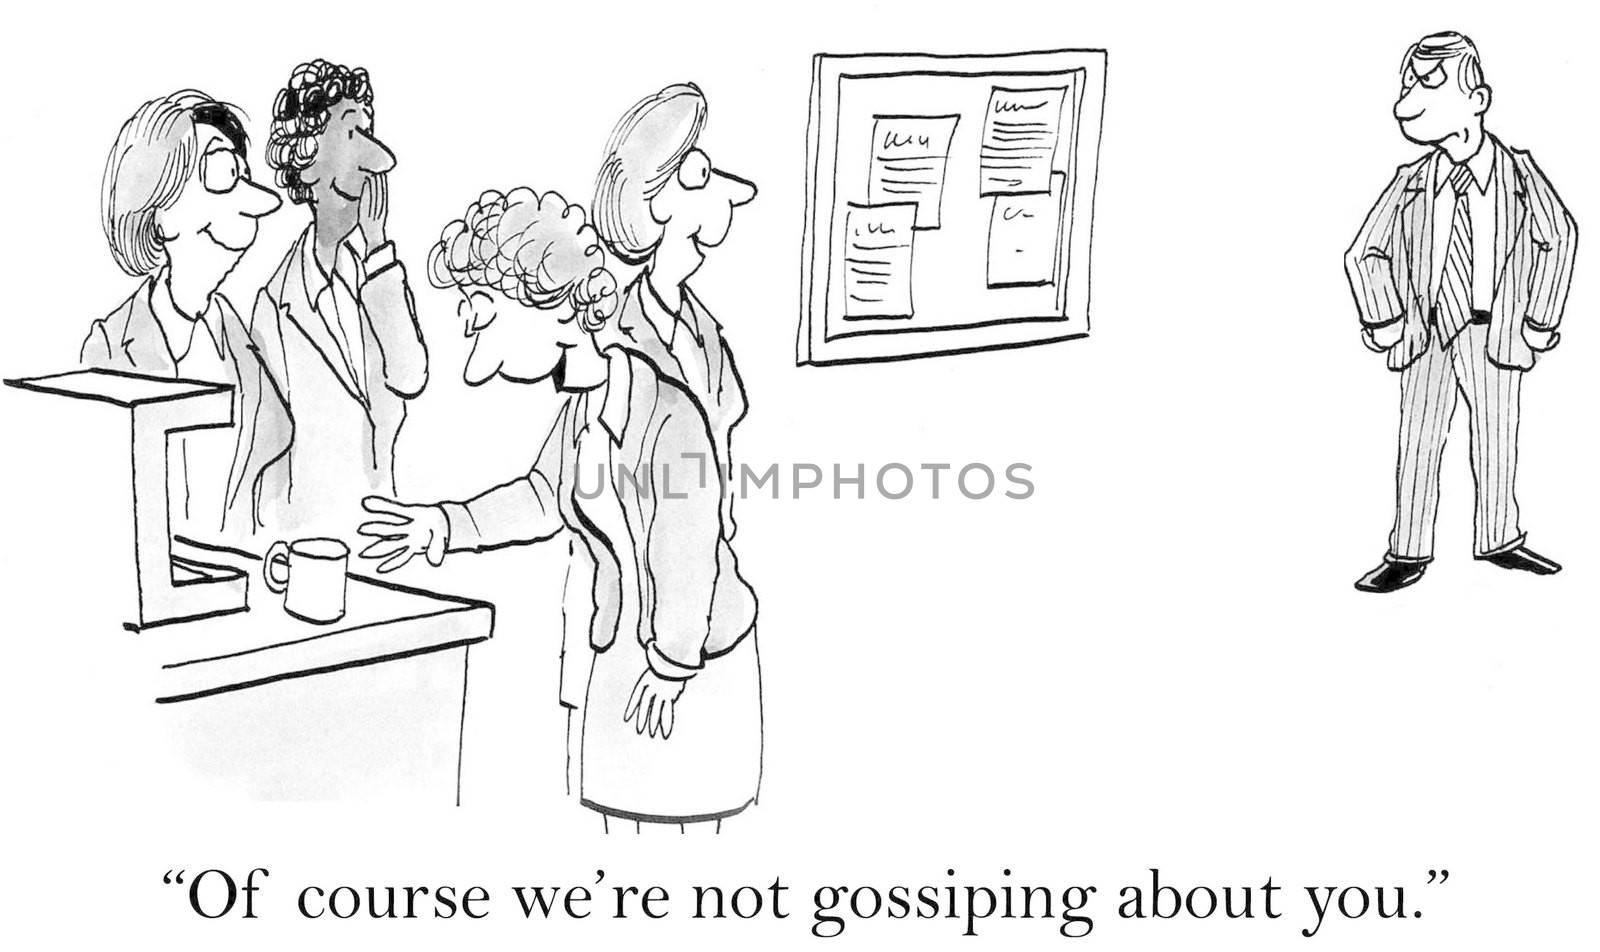 "Of course we're not gossiping about you."